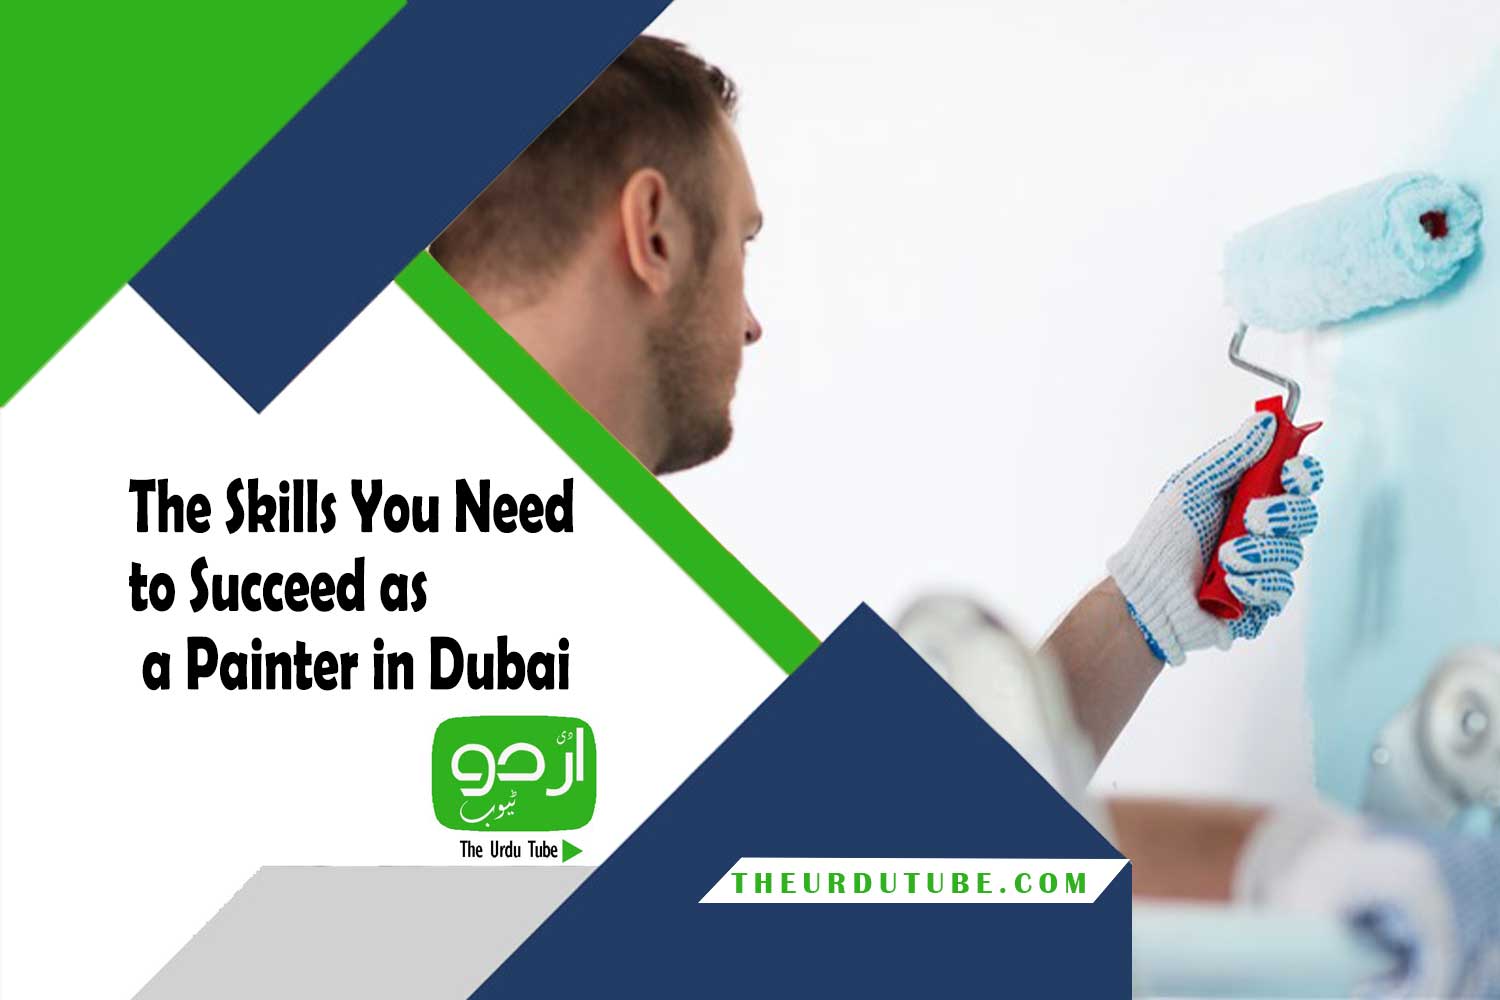 The Skills You Need to Succeed as a Painter in Dubai